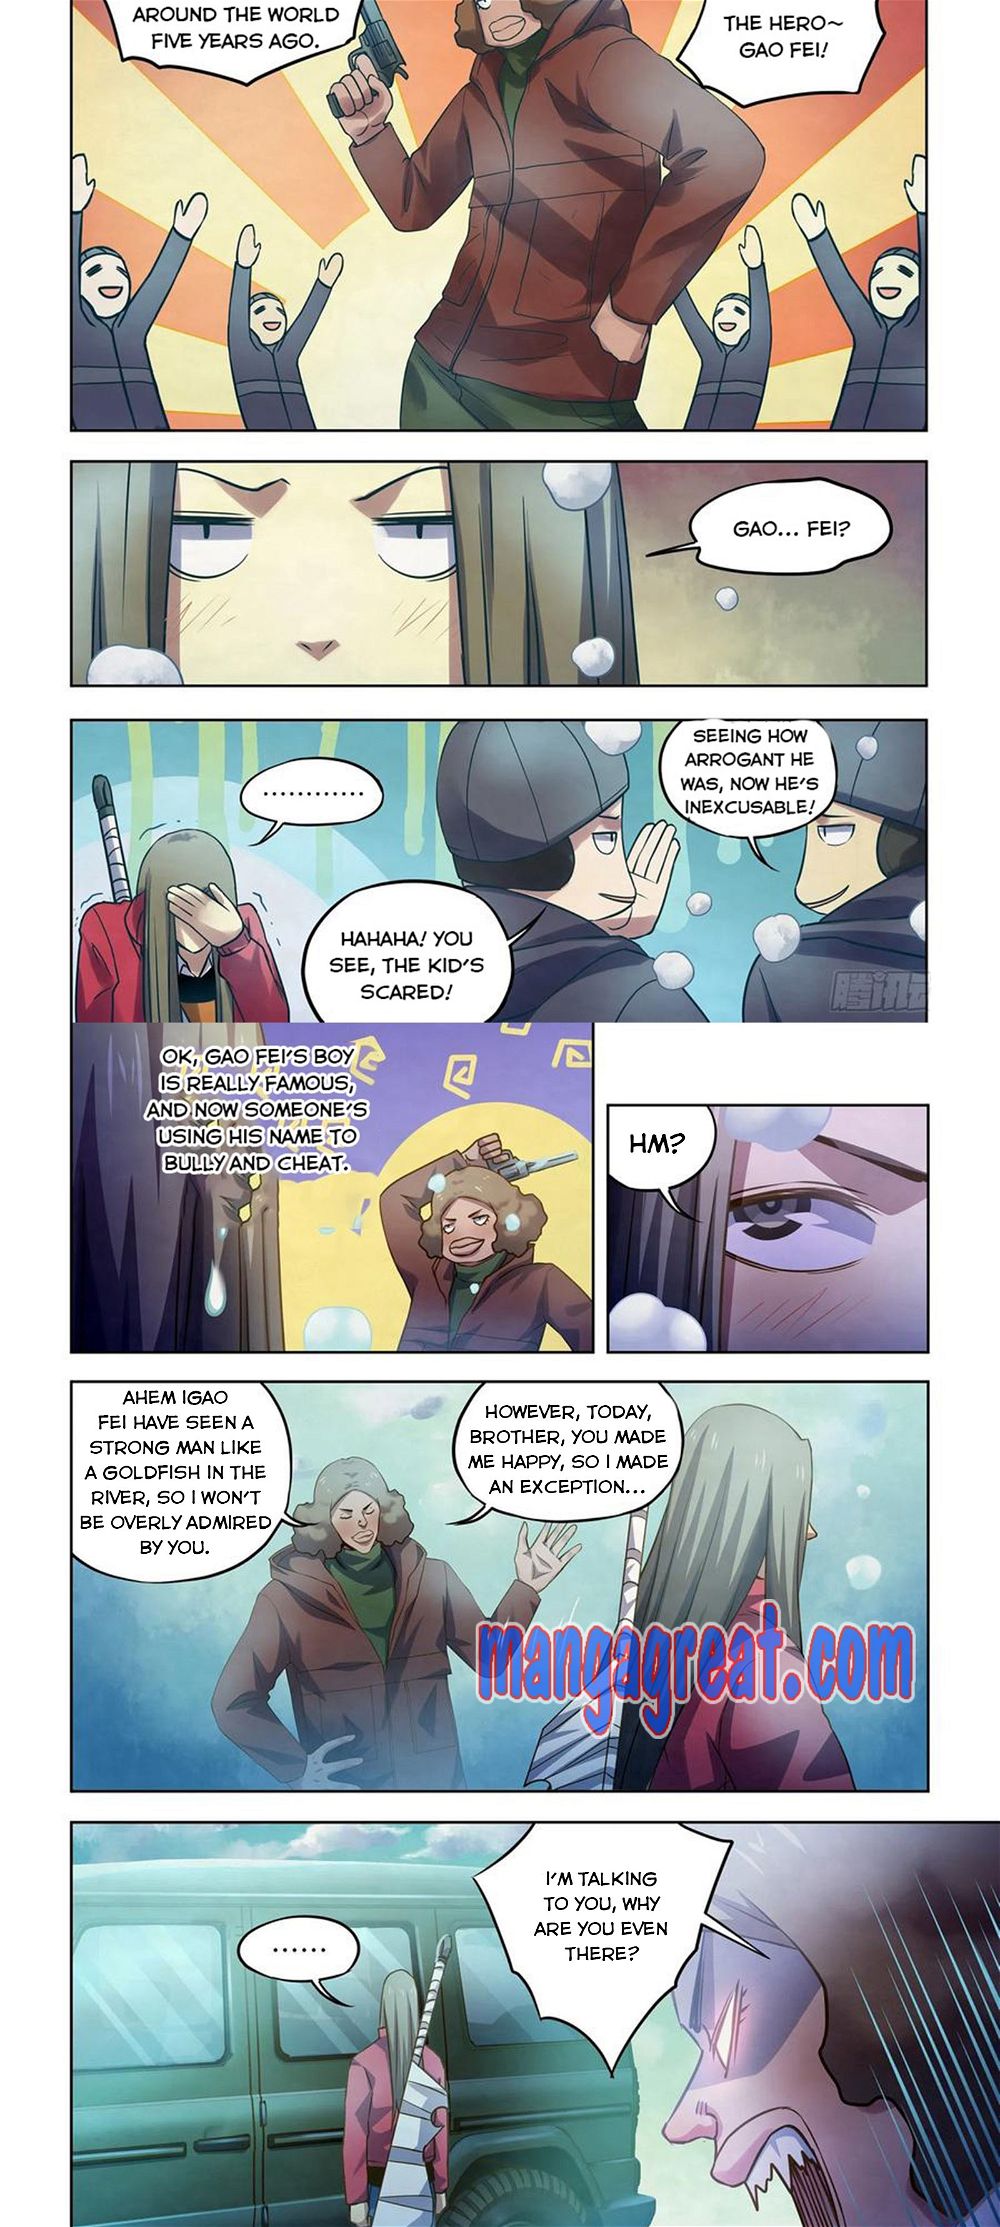 The Last Human Chapter 323 - Page 4